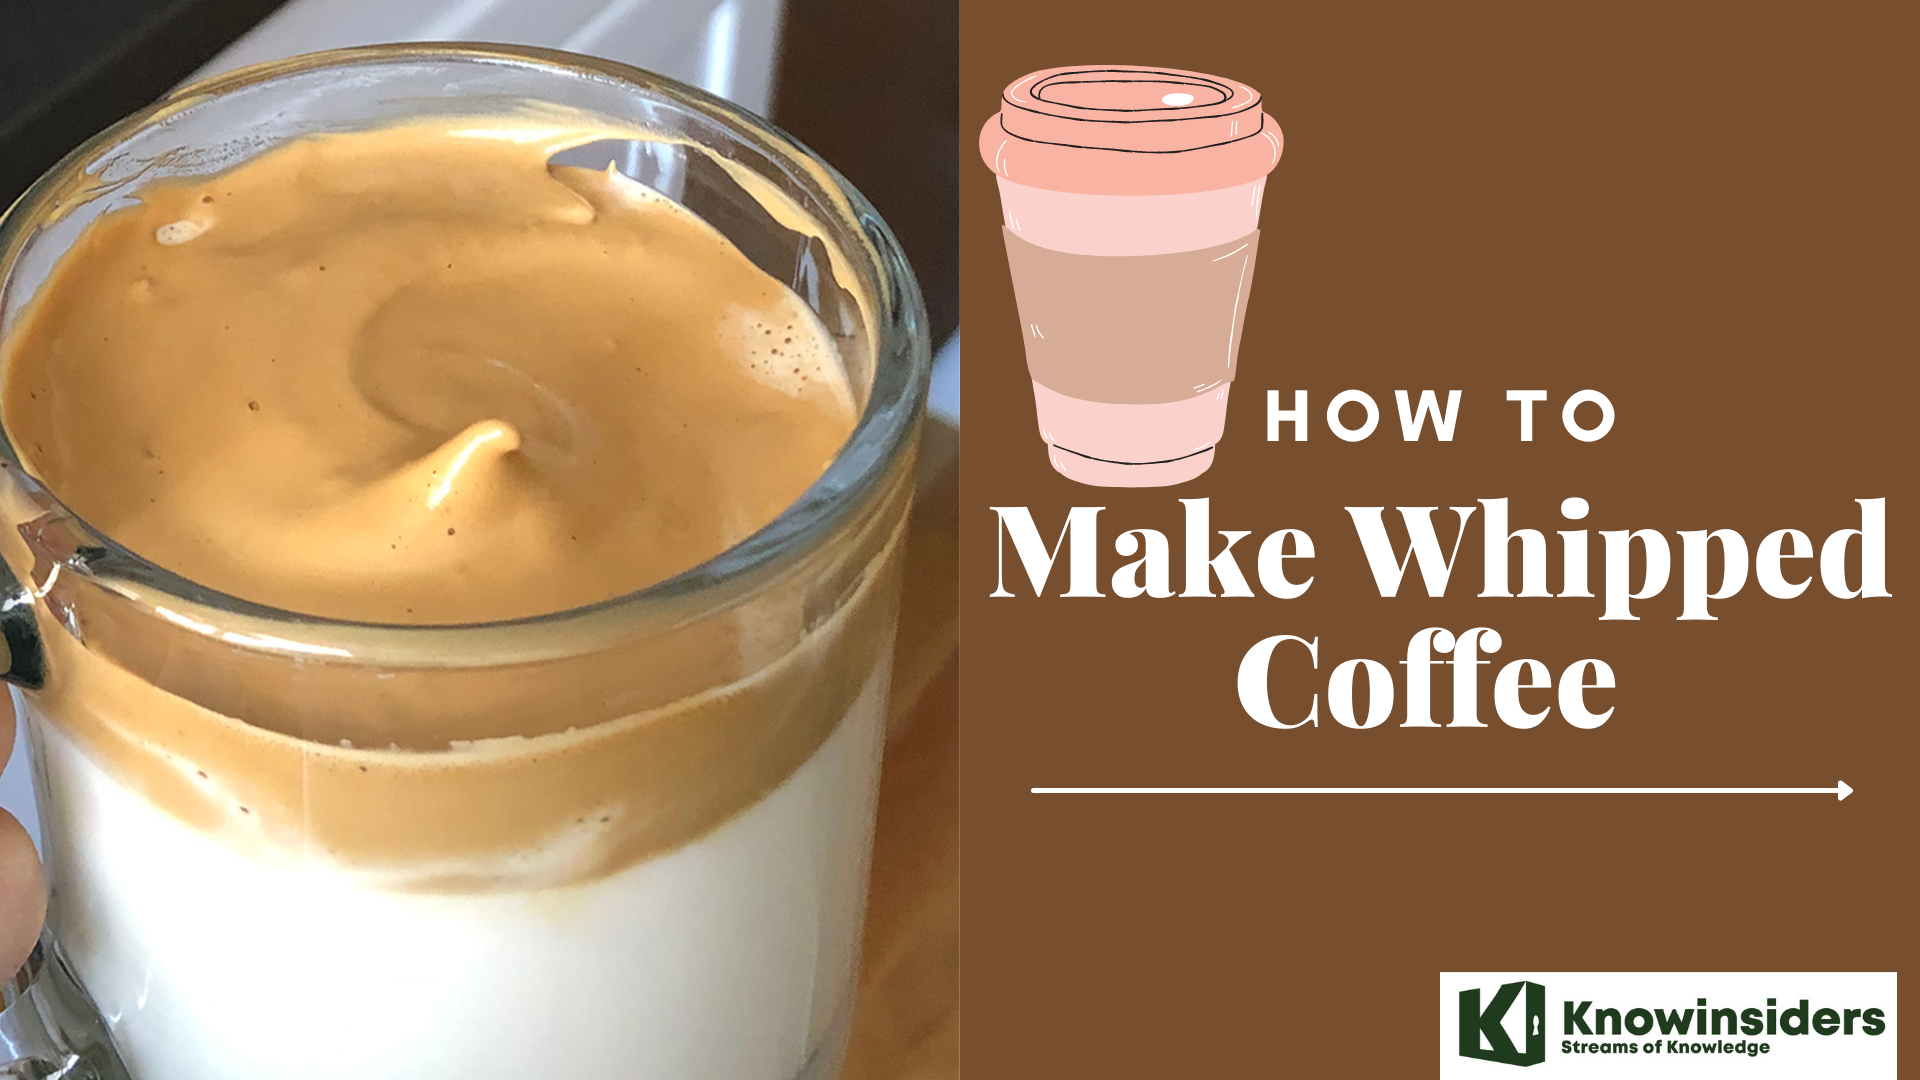 4 Easy Steps To Make Whipped Coffee or Dalgona Coffee